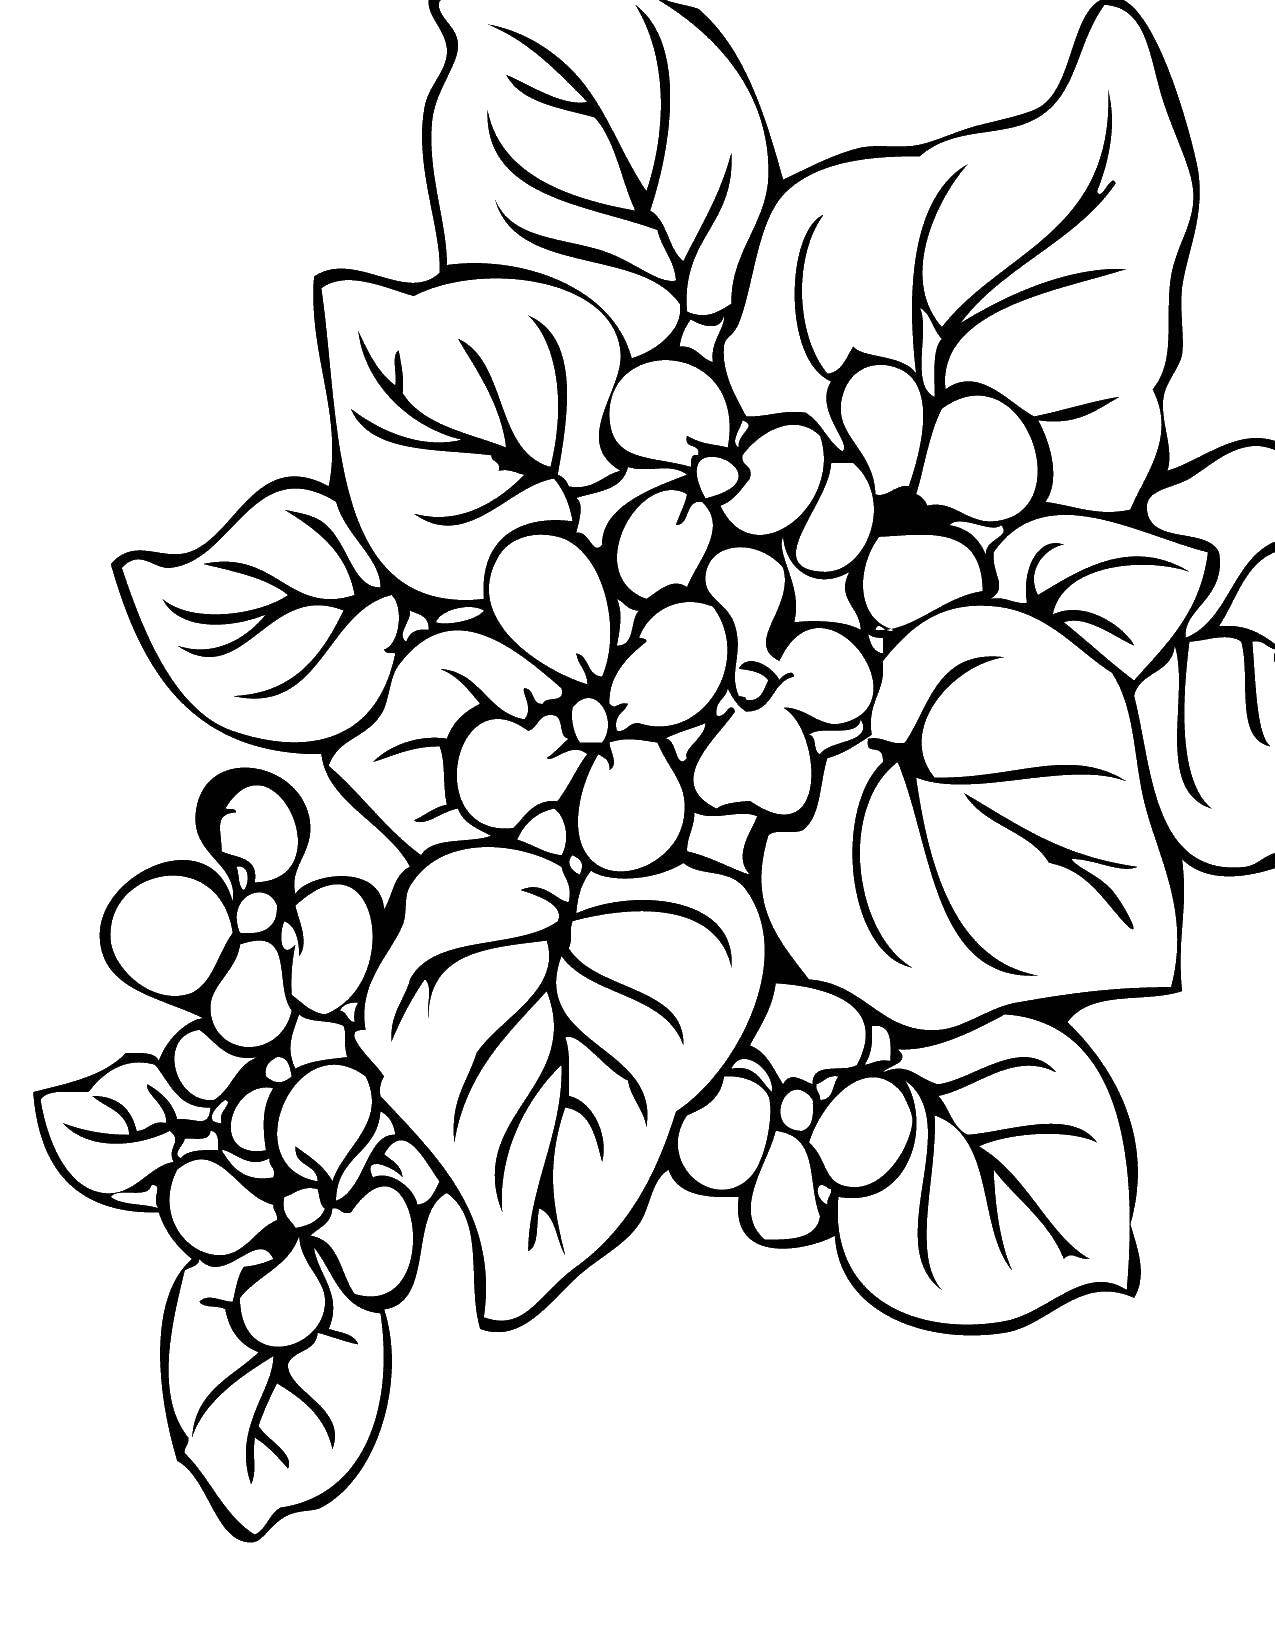 Coloring Flowers. Category plants. Tags:  flowers.